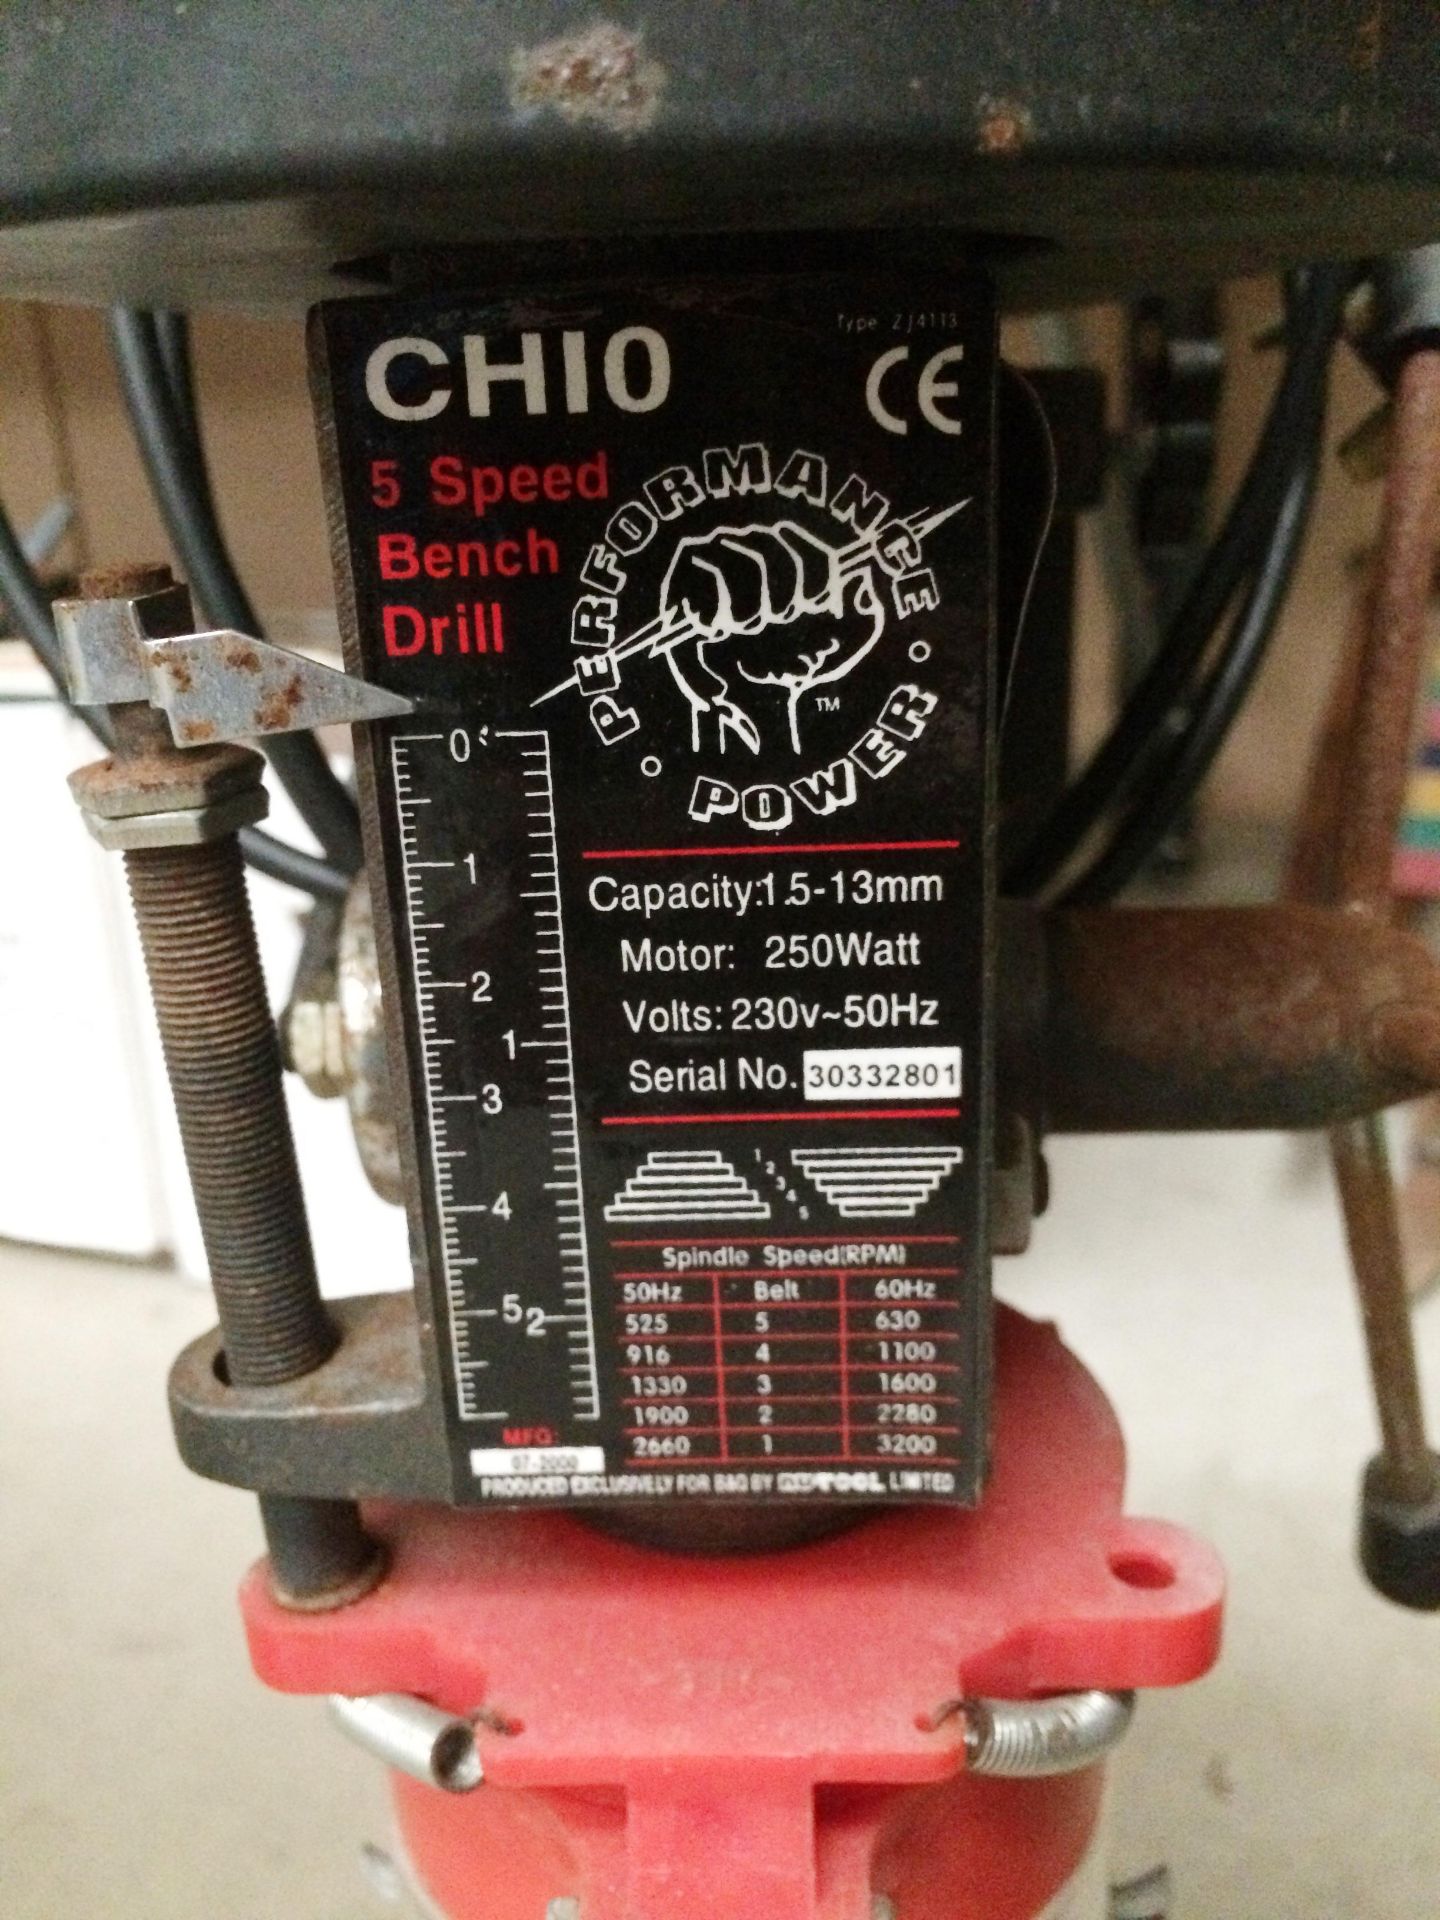 Performance Power CH10 5 speed bench drill - 240v - Image 2 of 2